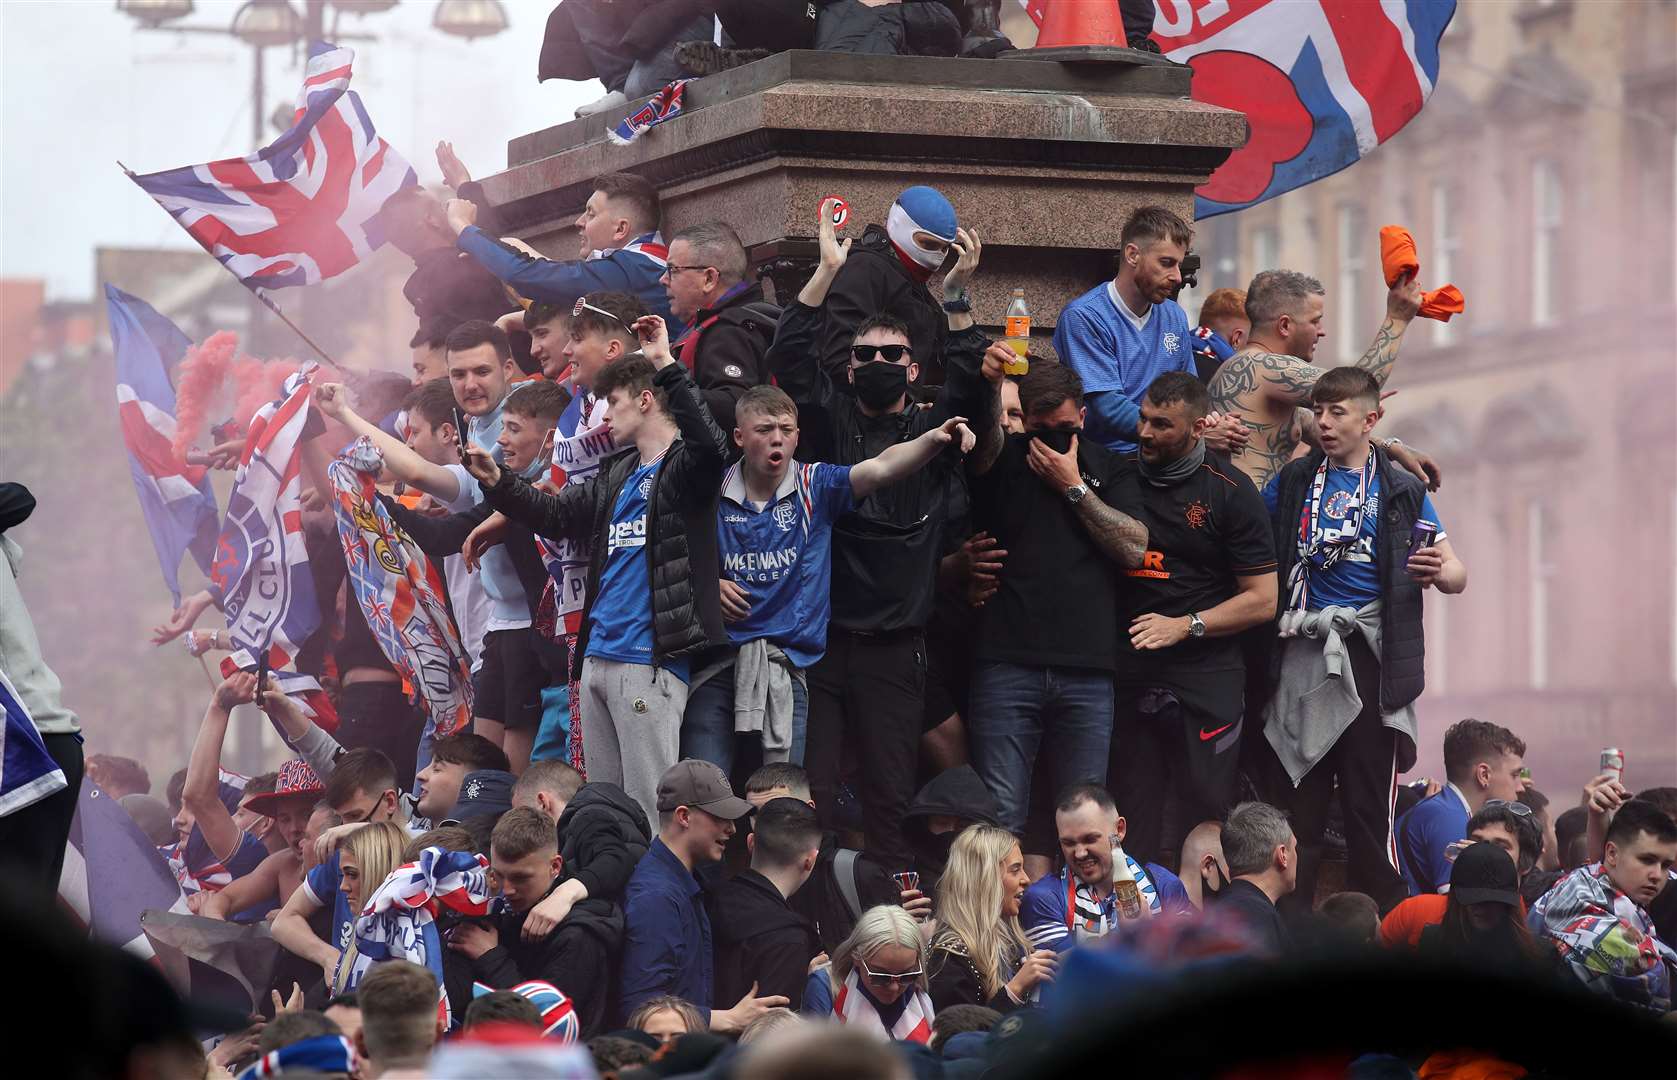 Rangers fans celebrate winning the Scottish Premiership in George Square, Glasgow (Andrew Milligan/PA)